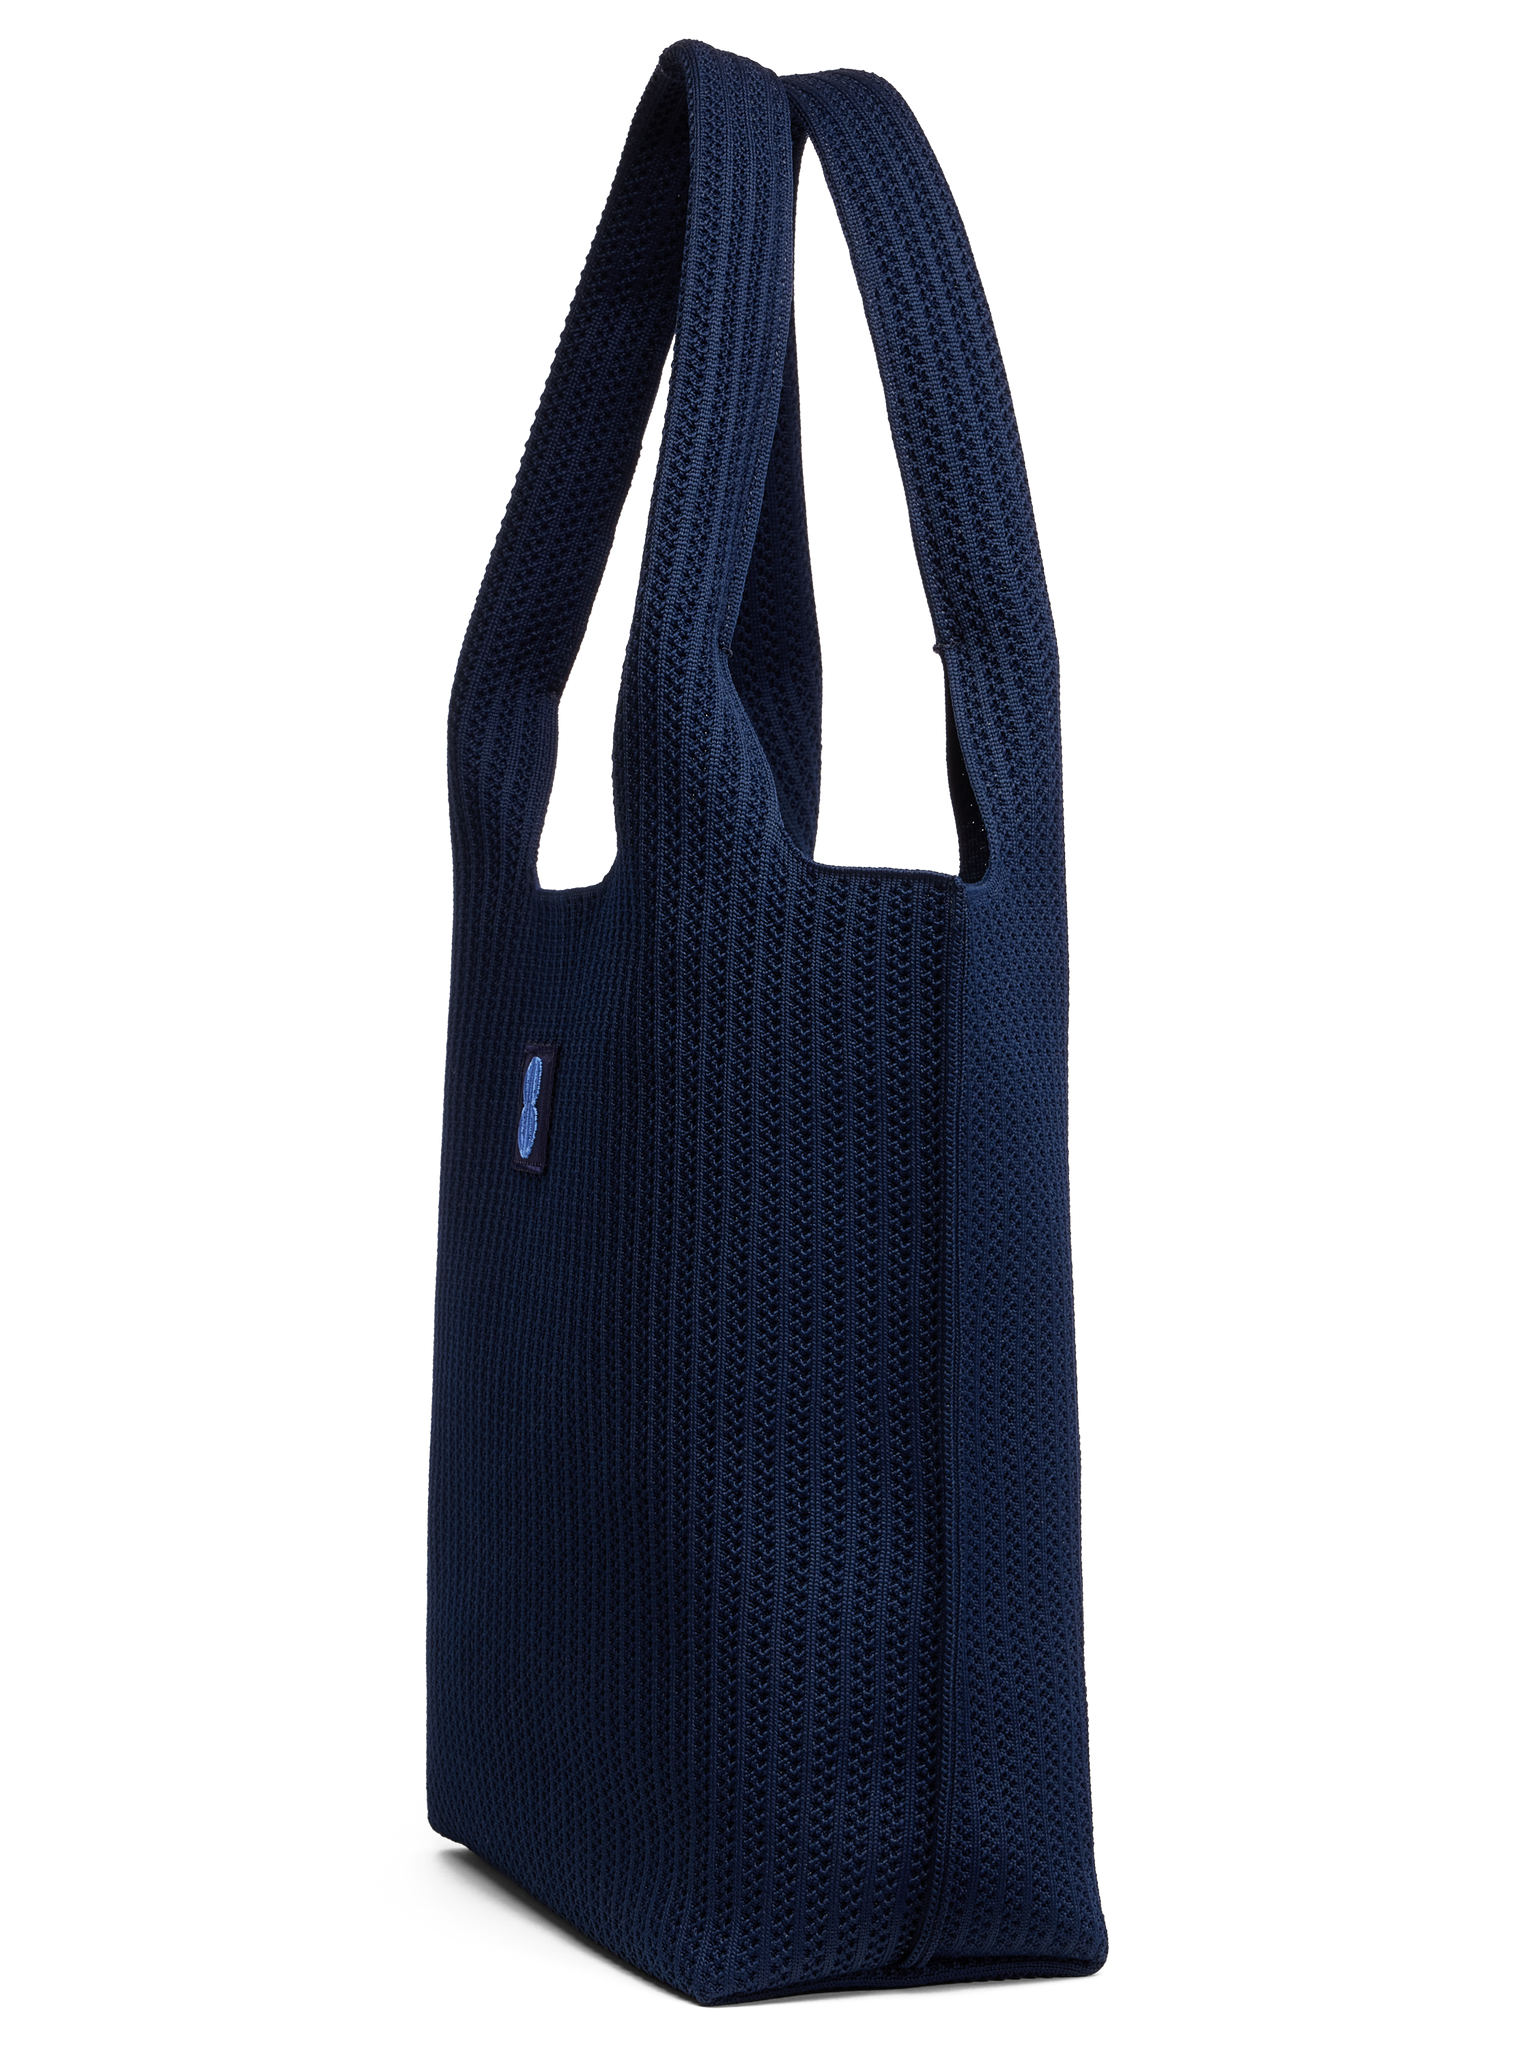 Medium - Navy Stripe Tote With Pouch